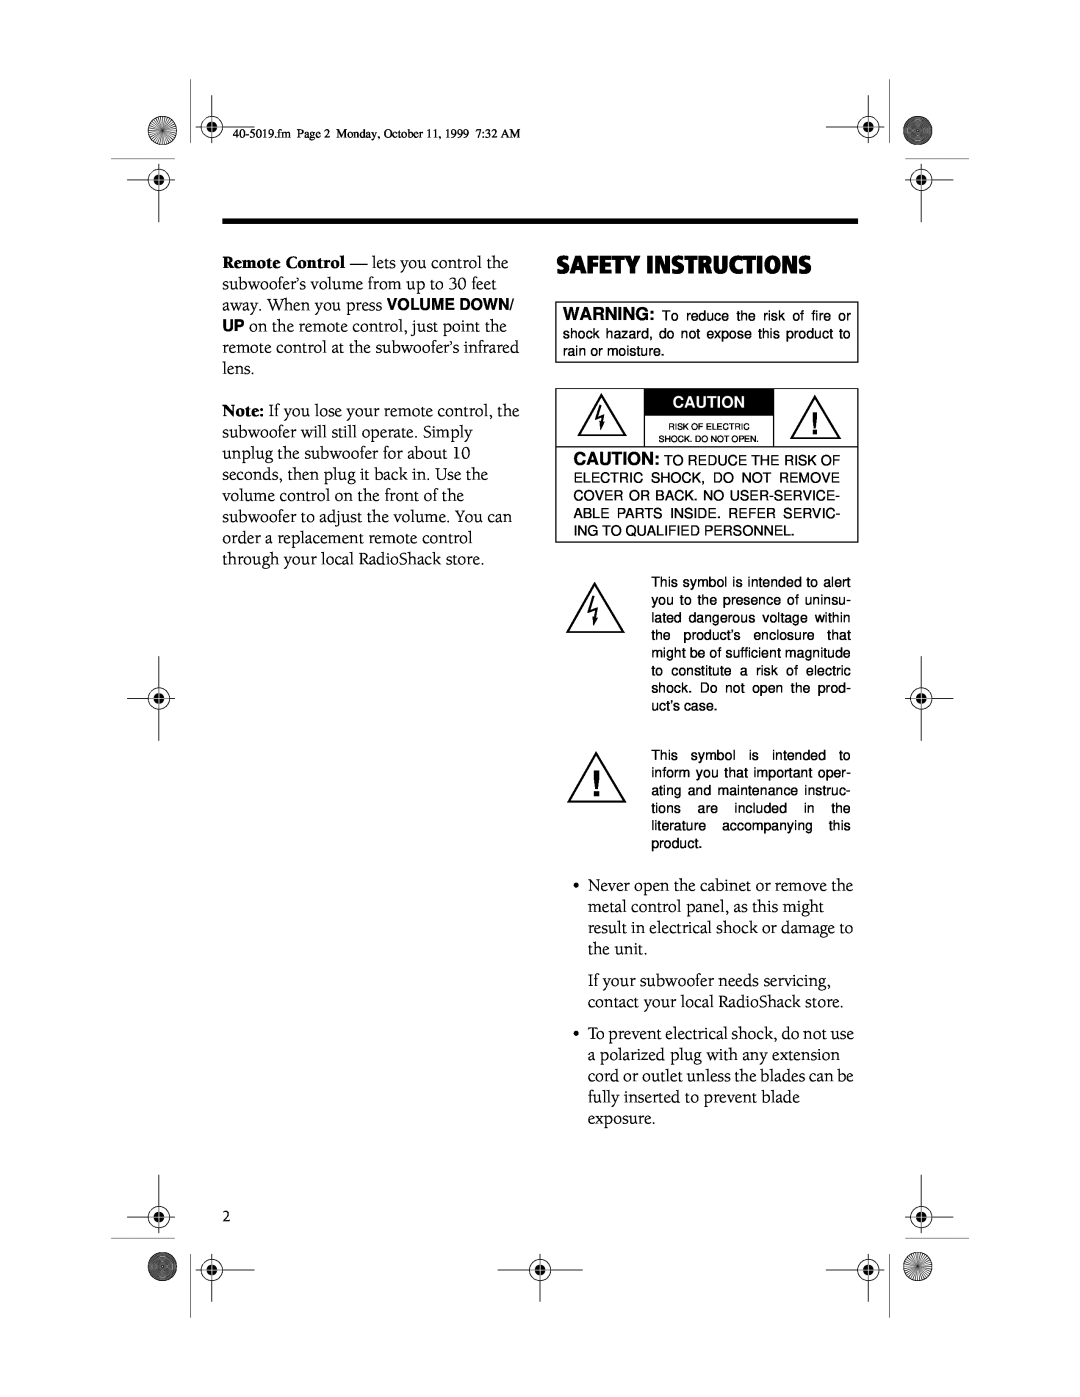 RCA PRO-SW200P, 40-5019 manual Safety Instructions 